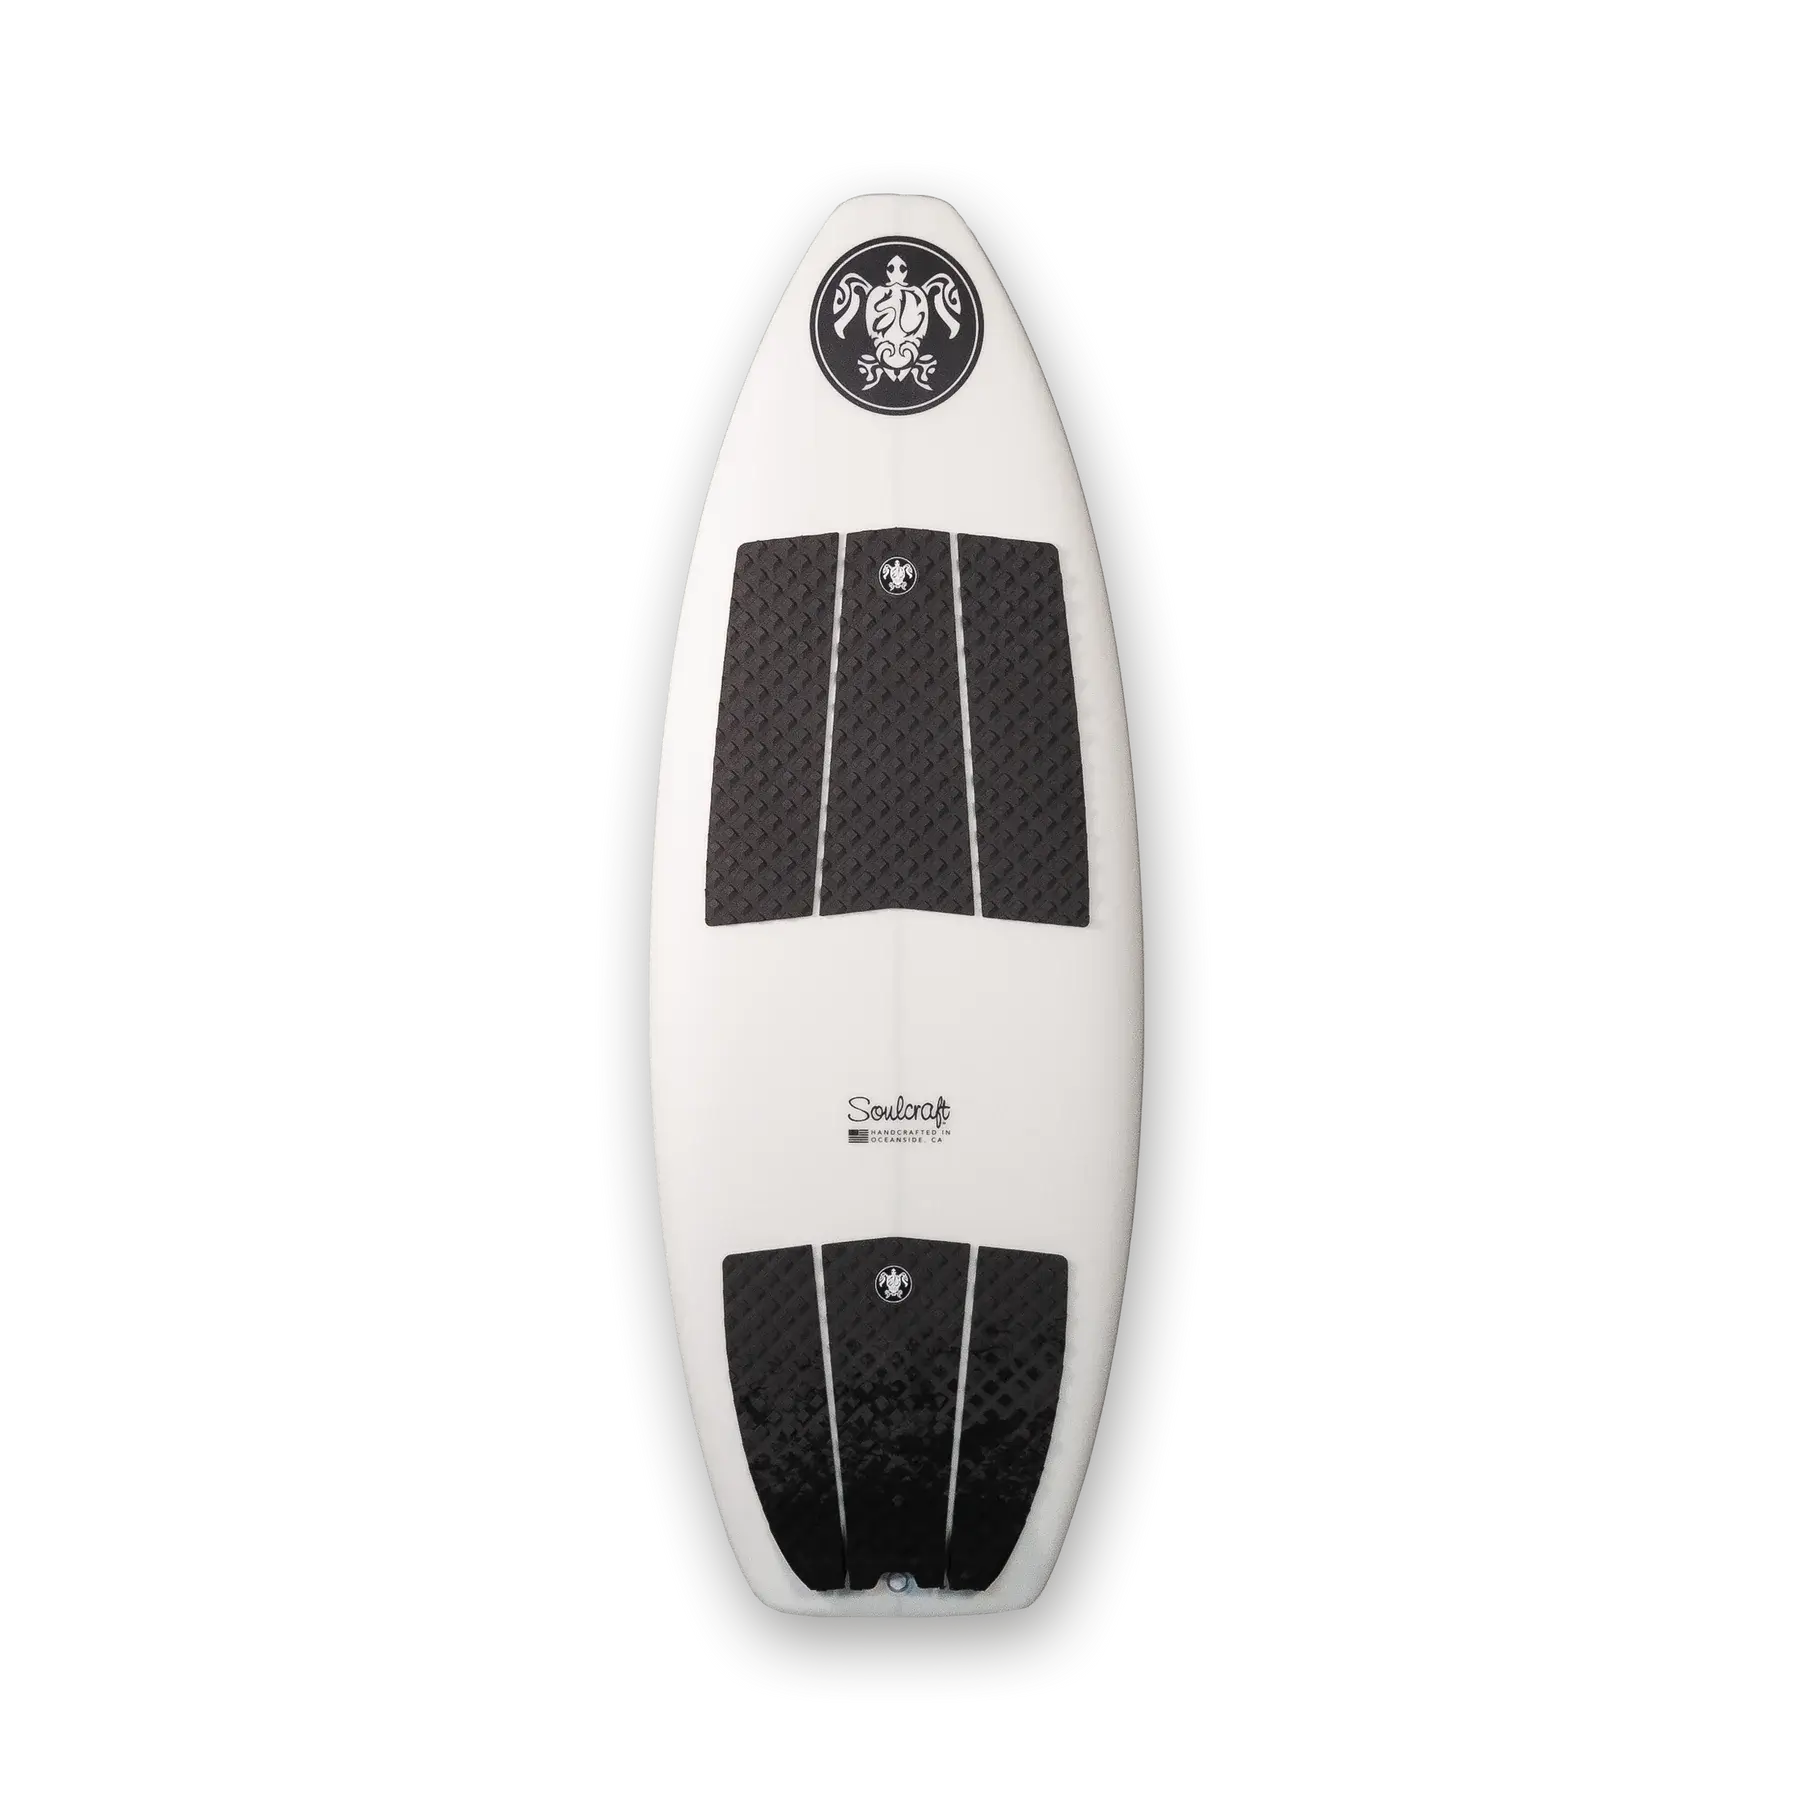 A white and black Soulcraft M2 Wakesurf Board carving through the water during surf comps.